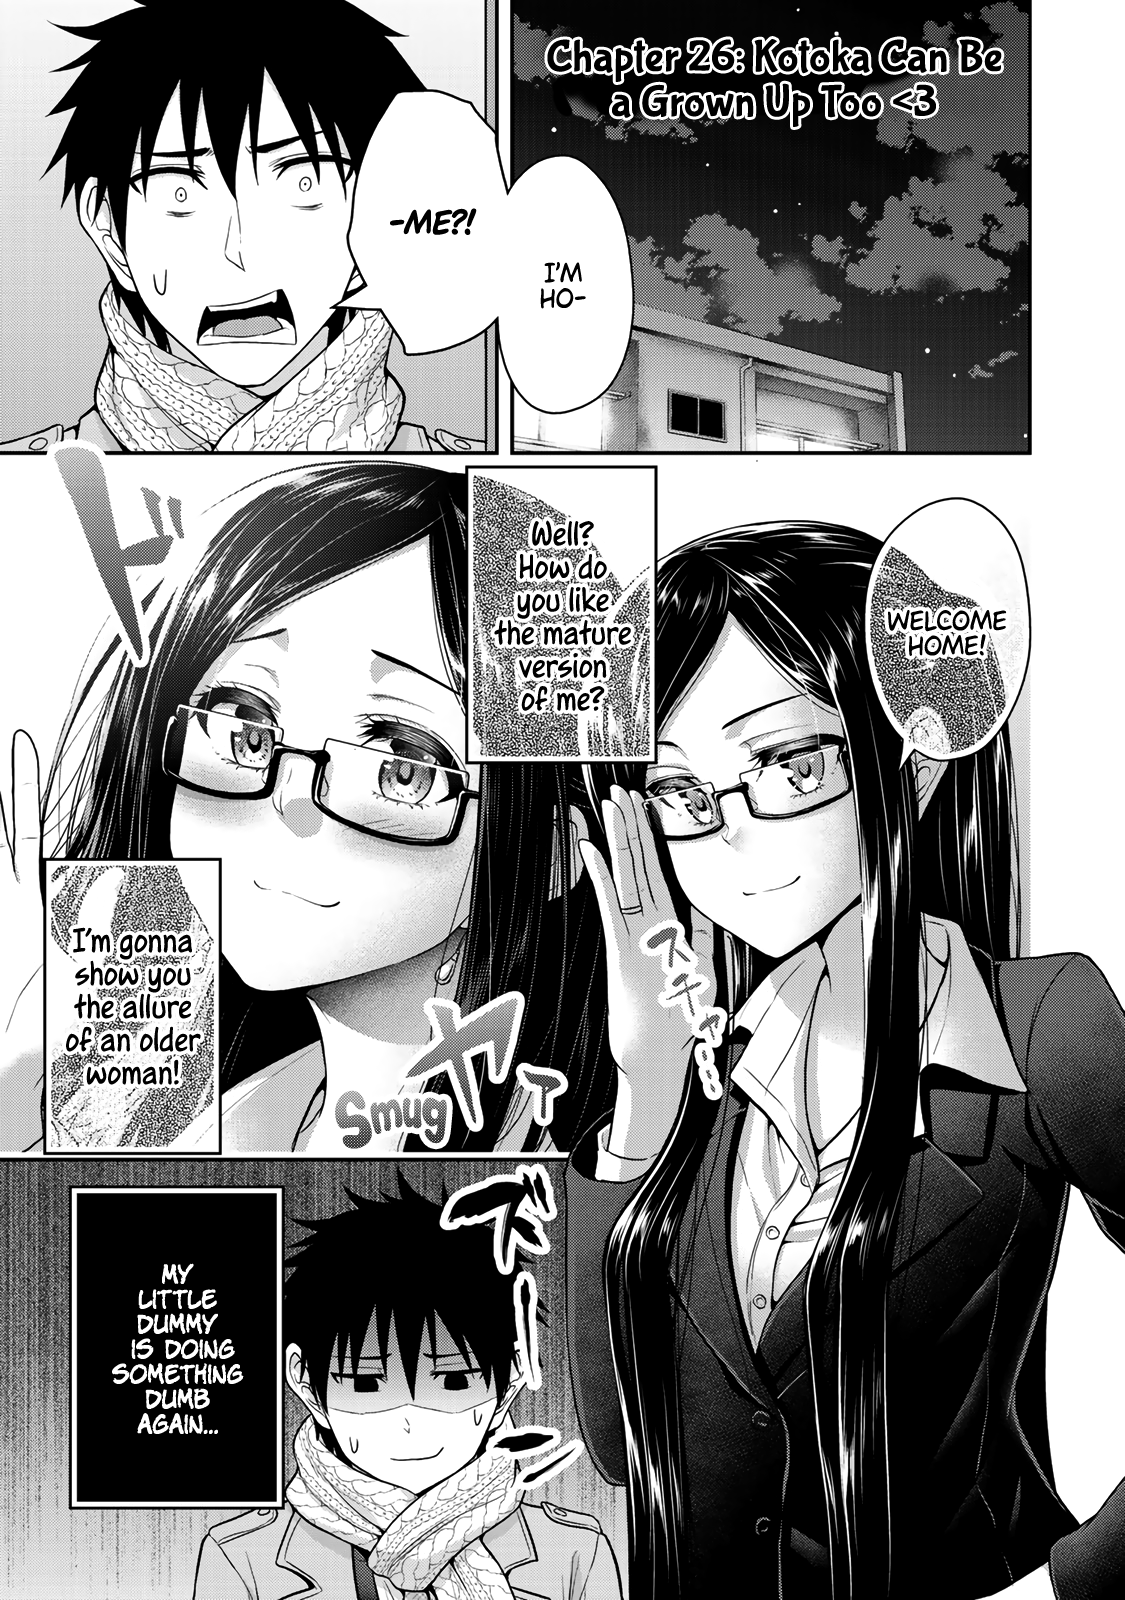 Fechippuru ~Our Innocent Love~ Vol.3 Chapter 26: Kotoka Can Be A Grown Up Too <3 - Picture 1